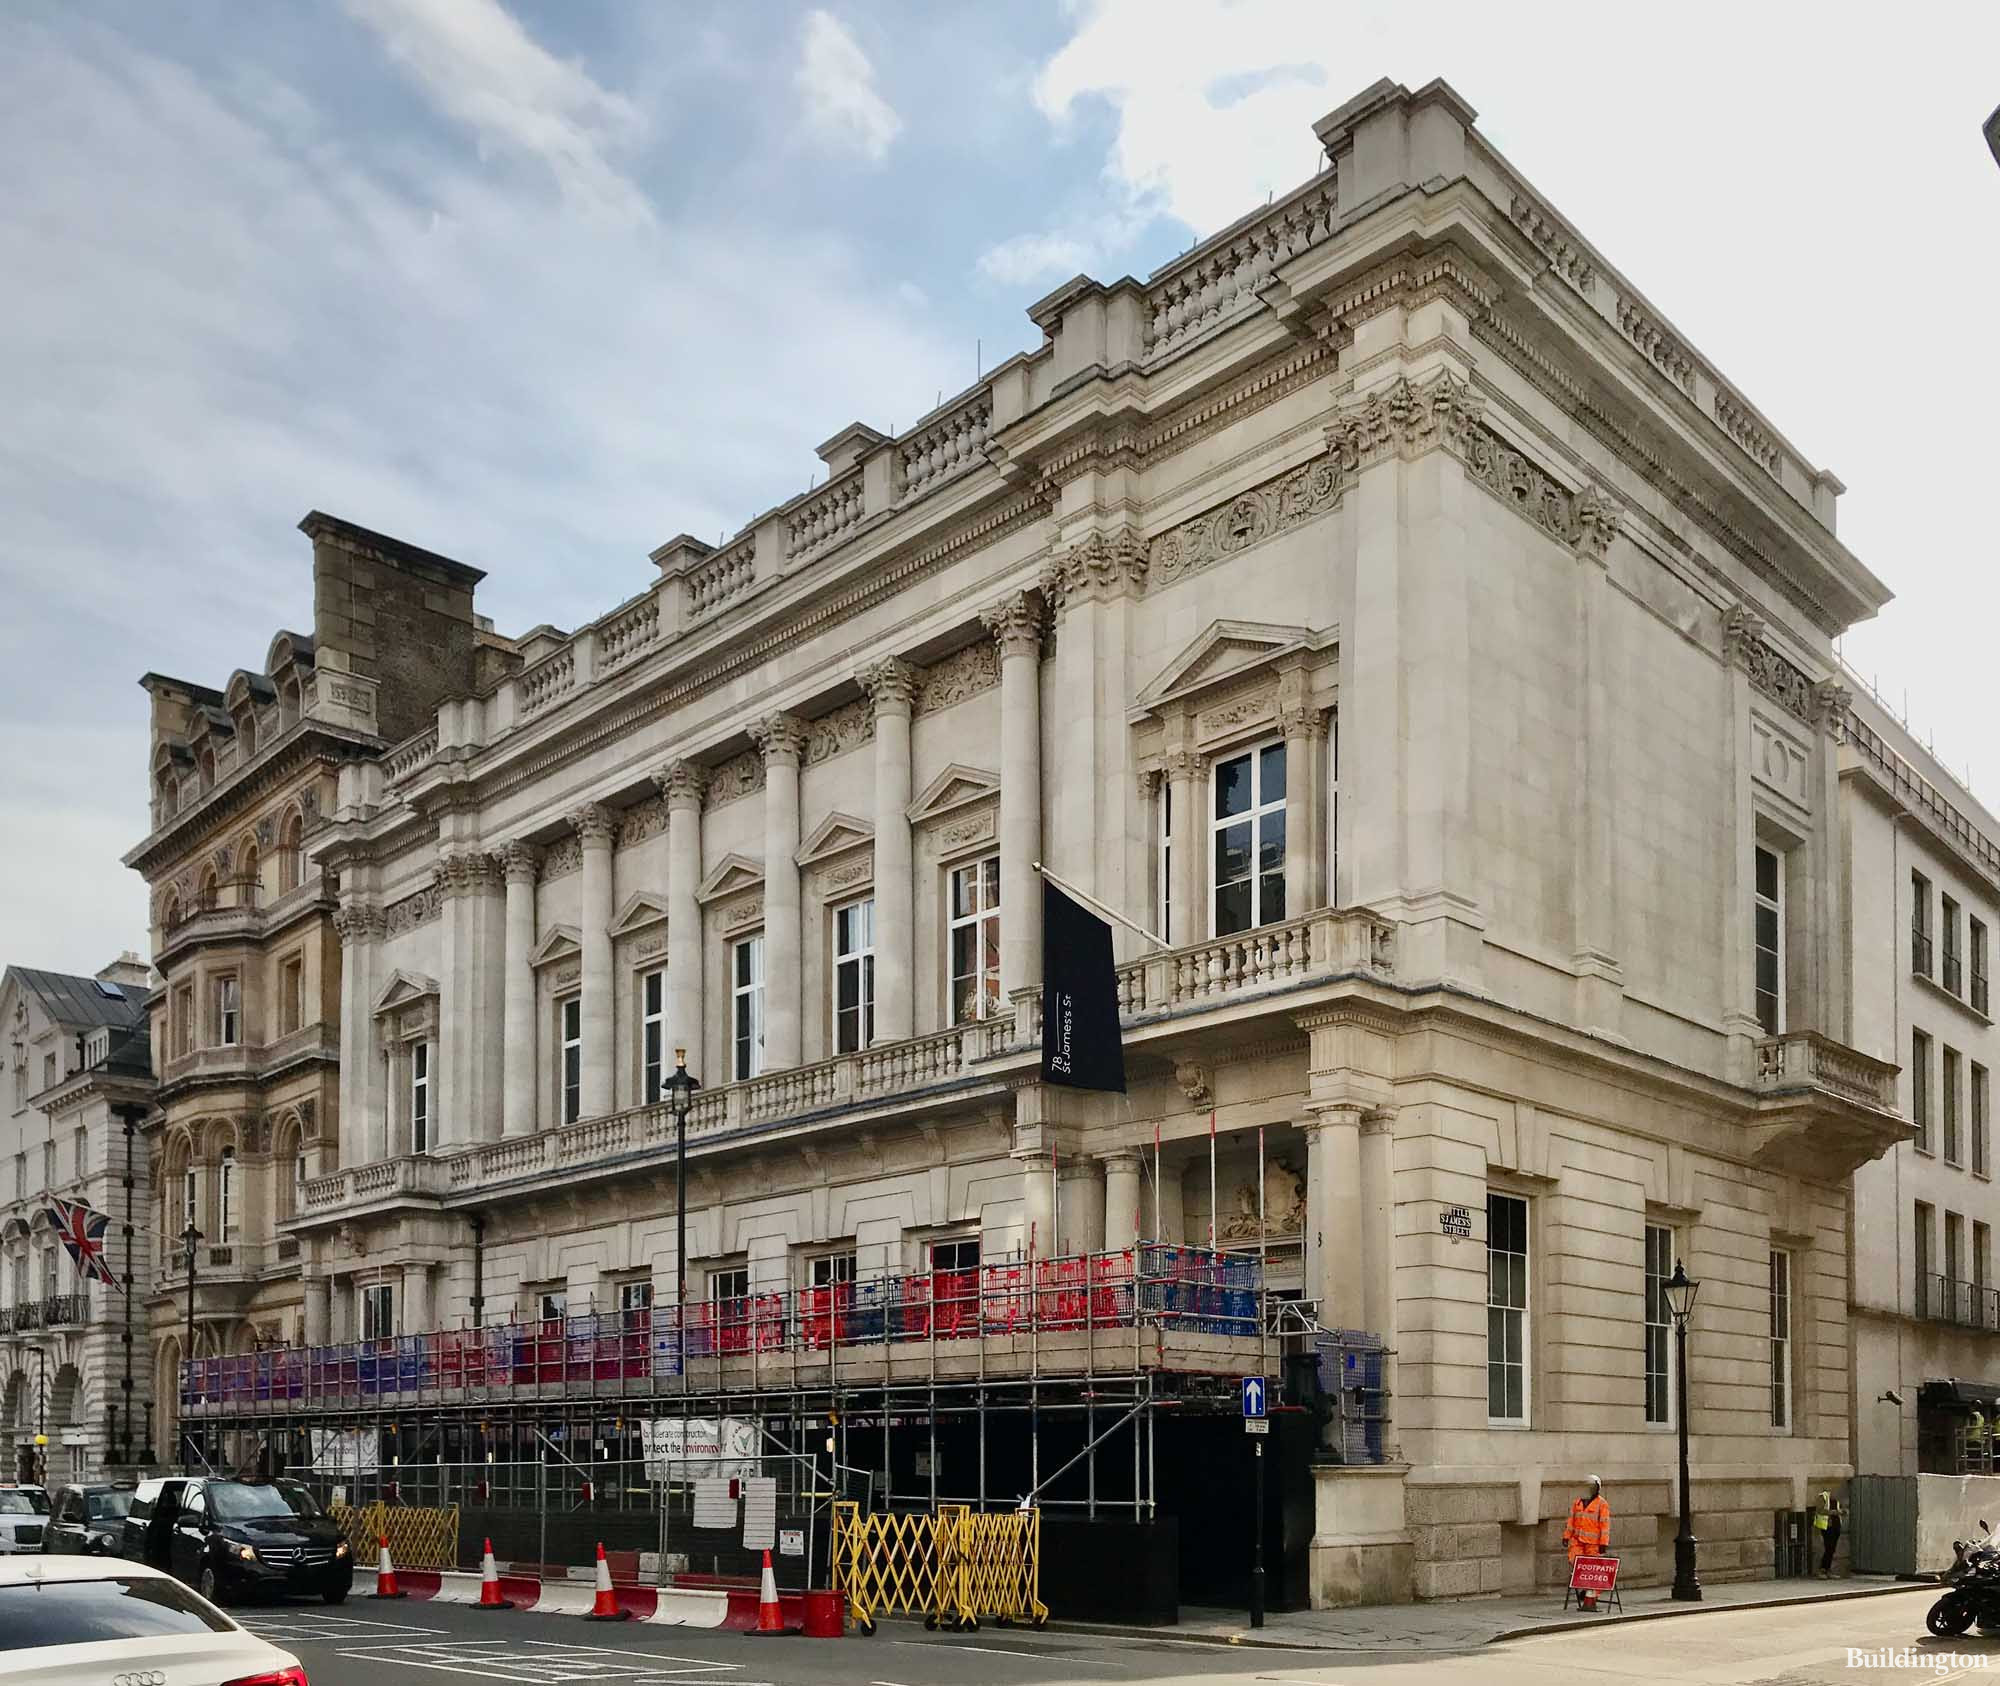 78 St James's Street - 110,000 sq ft of office space will be available after the refurbishment. Agents JLL and BNP Paribas. 